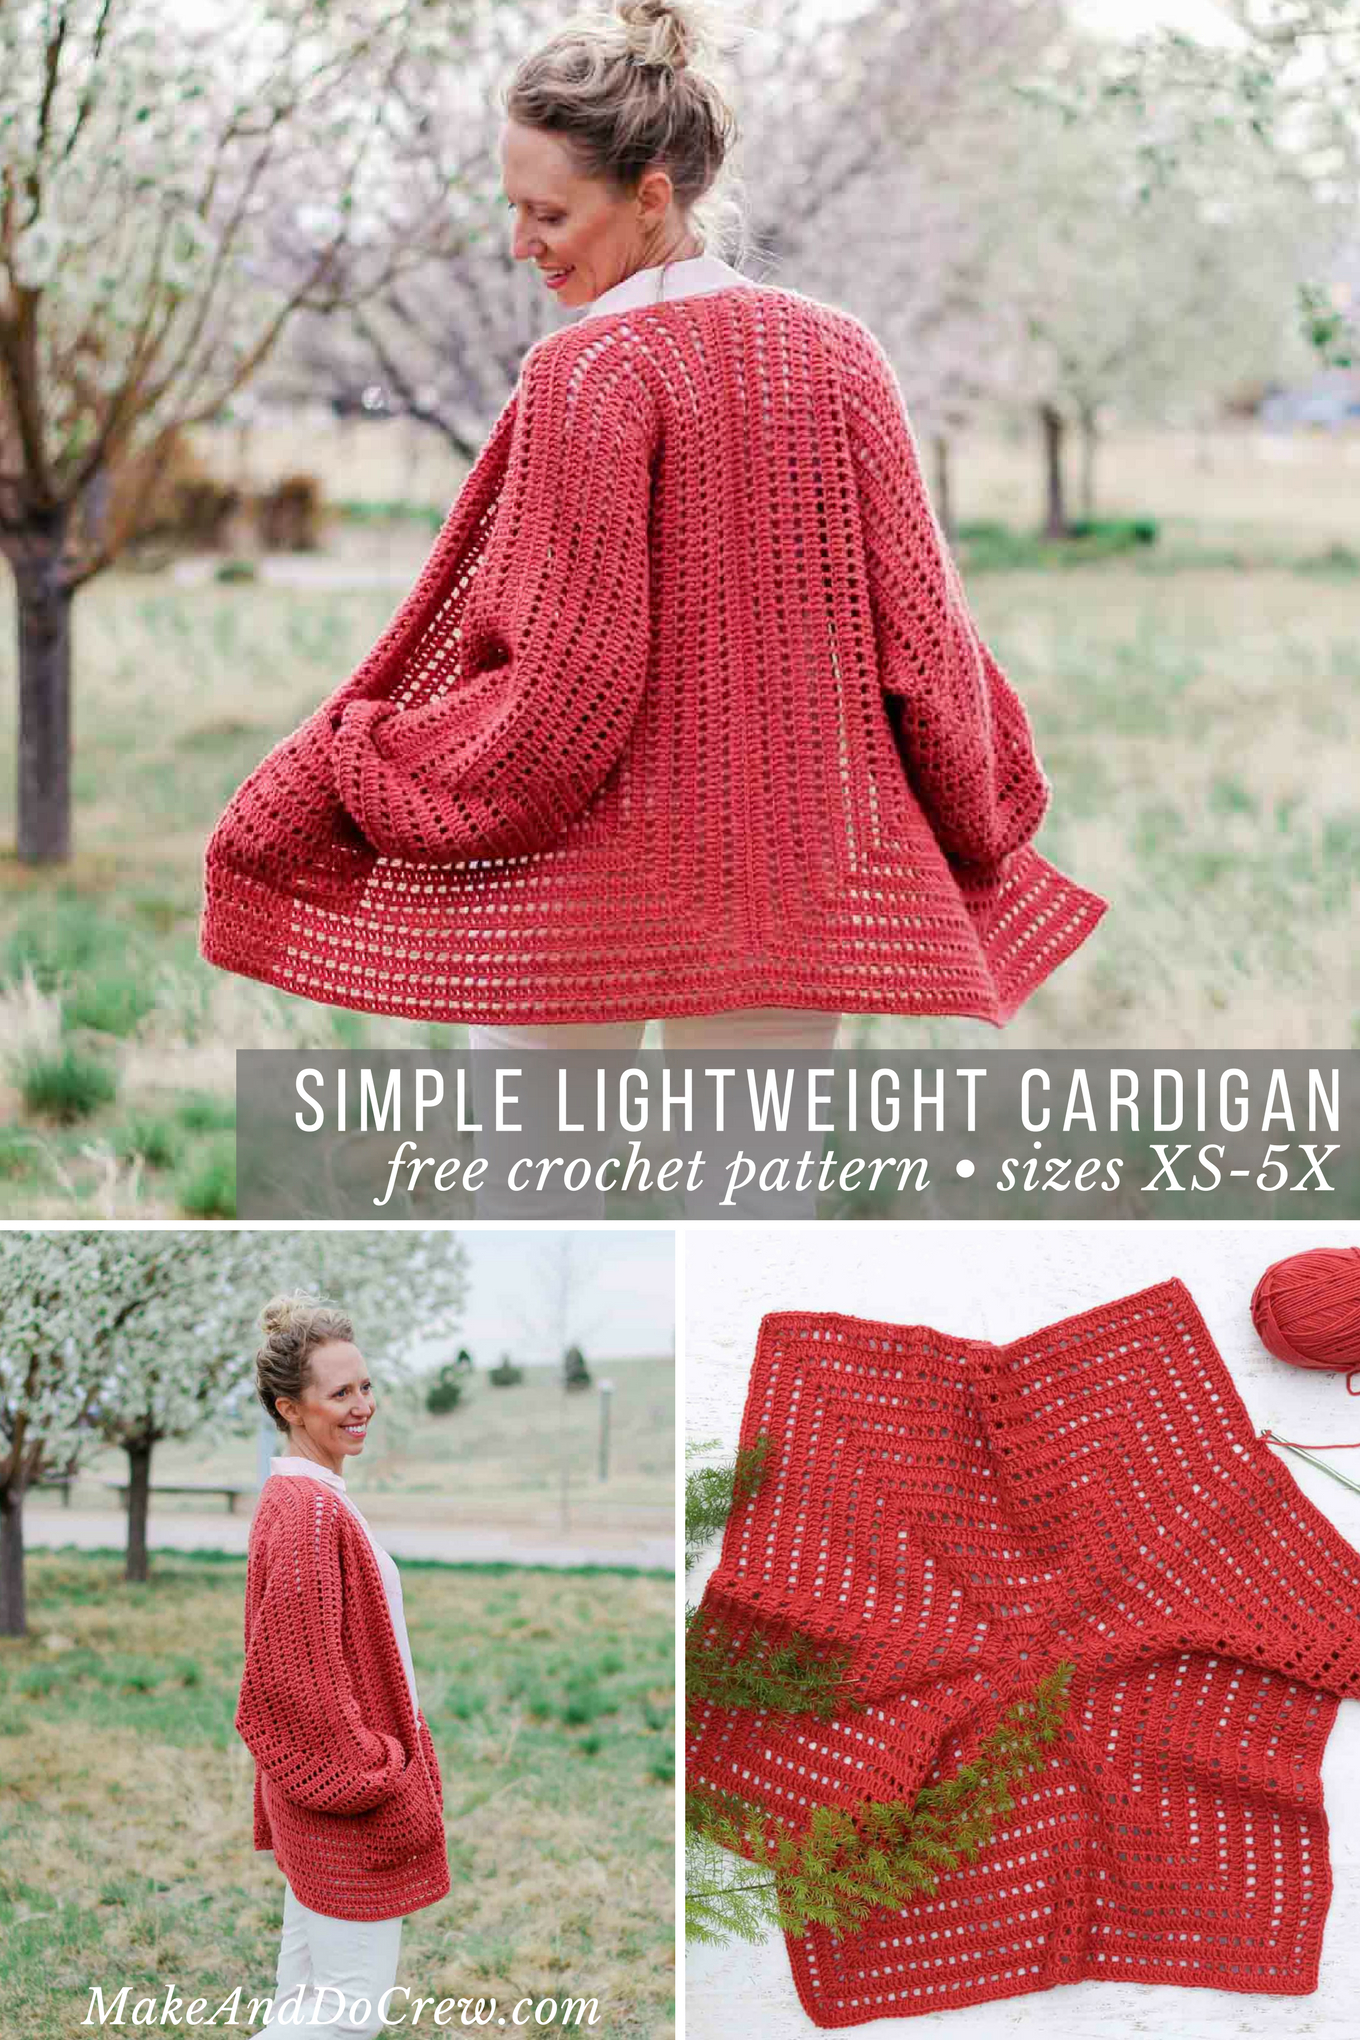 Lion Brand Free Crochet Patterns Free Easy Crochet Sweater Pattern A Cardigan Made From 2 Hexagons